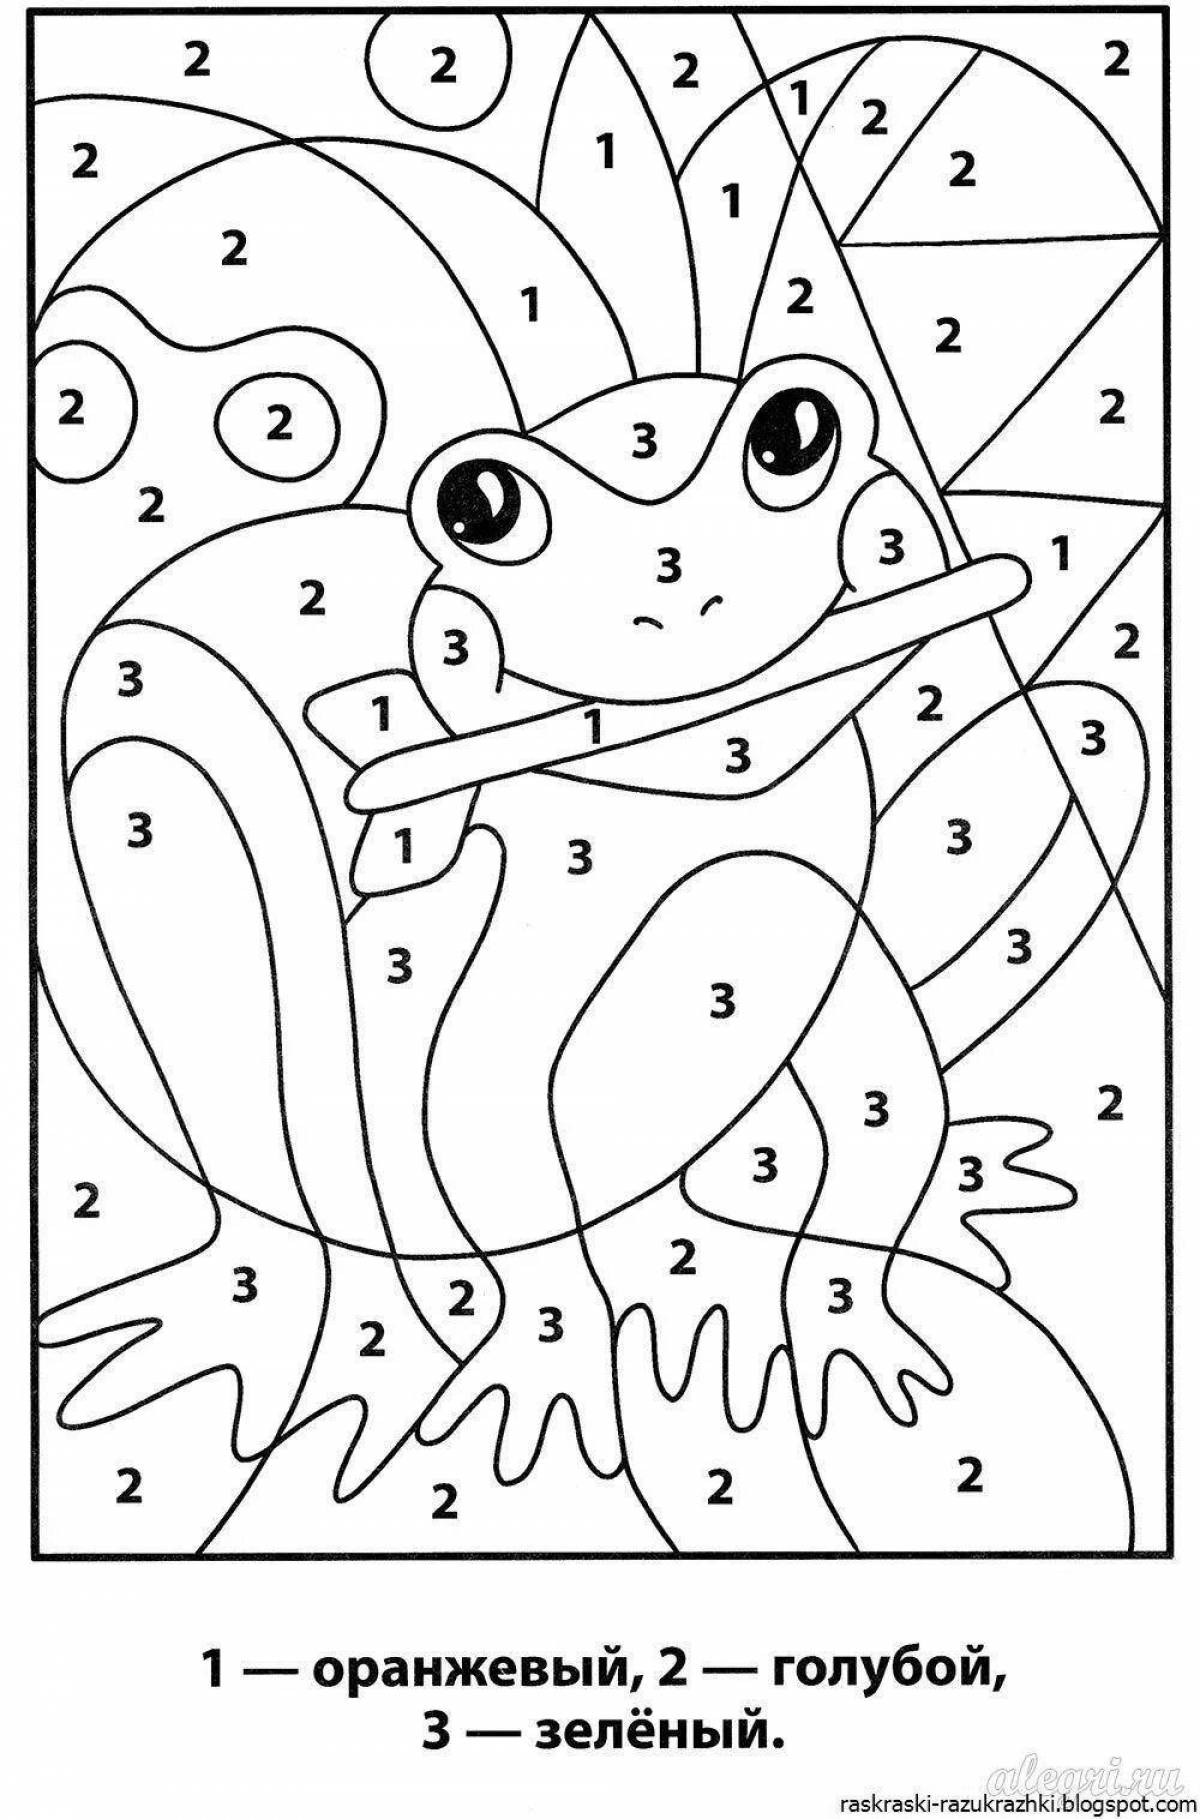 Coloring book smart for 4-5 year olds